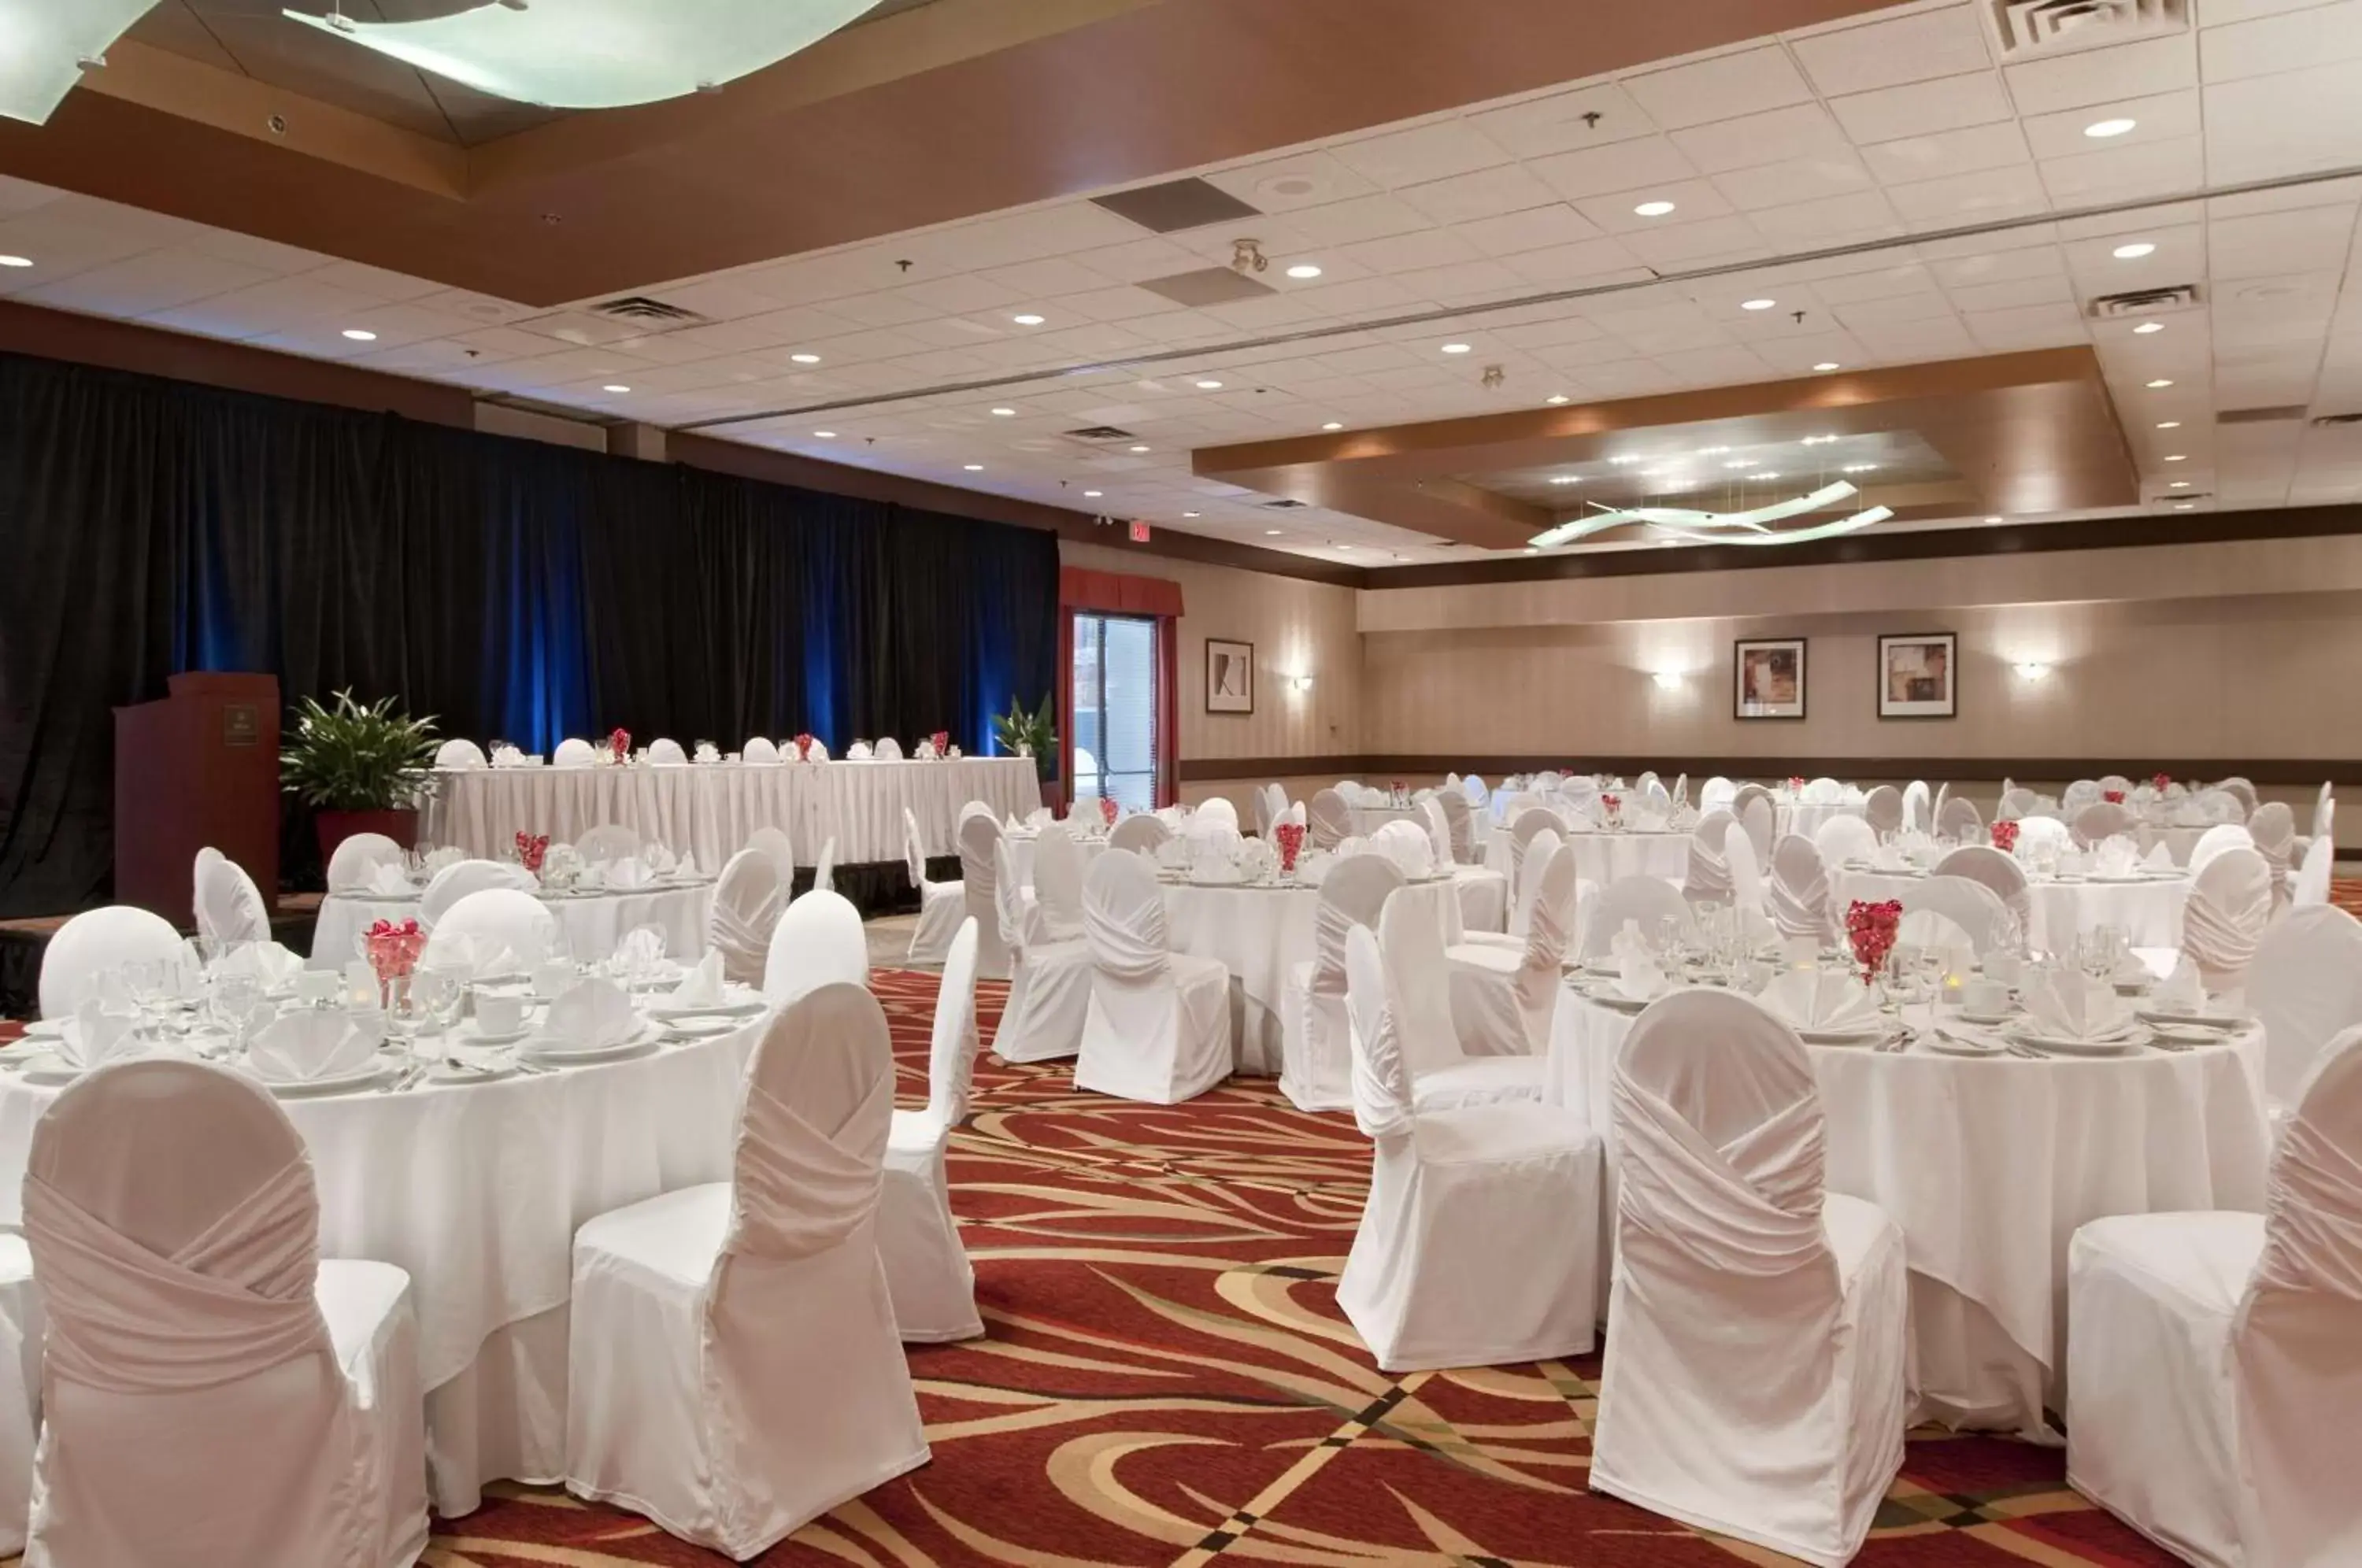 Meeting/conference room, Banquet Facilities in Hilton Whistler Resort & Spa